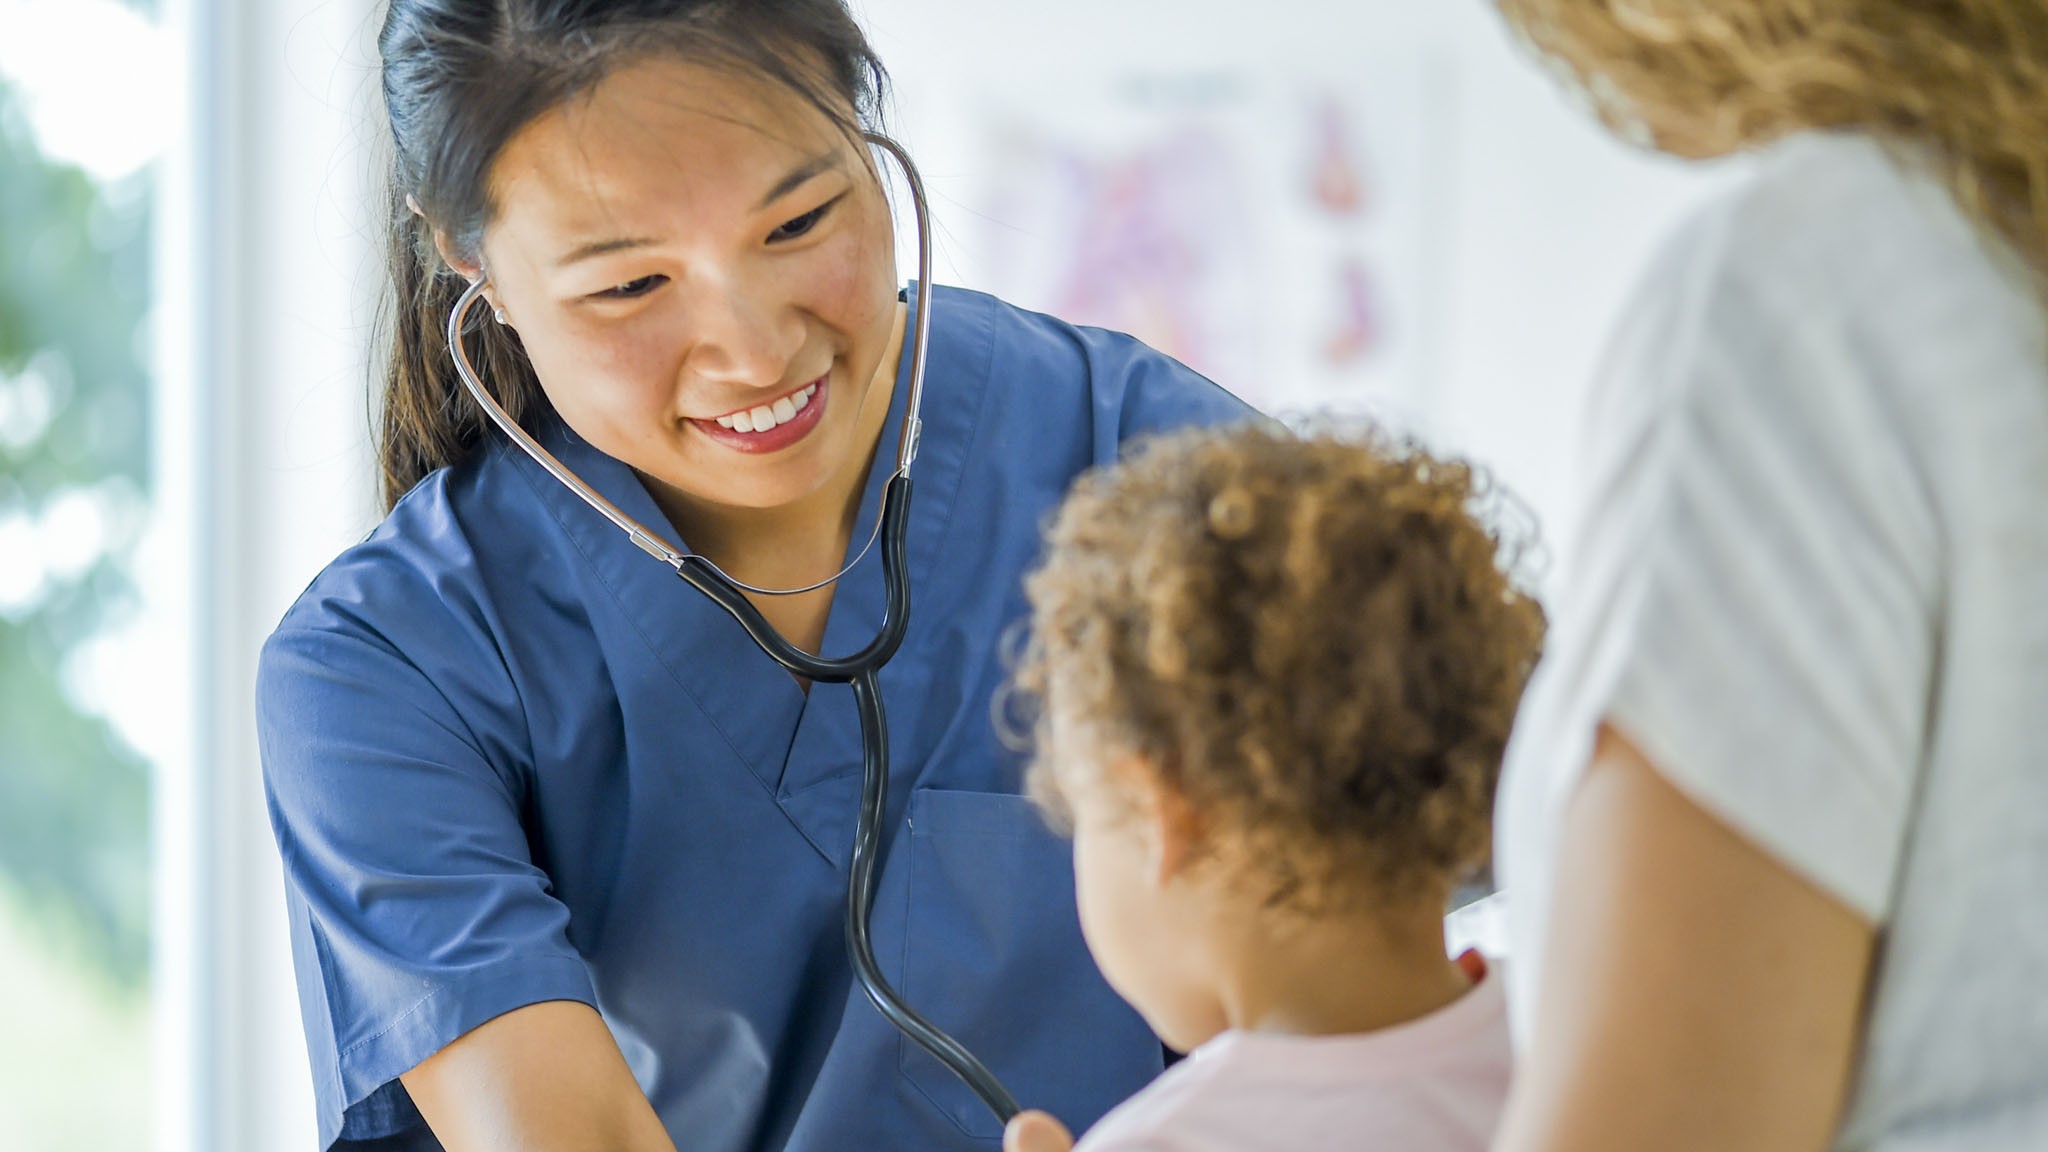 A nursing student in the Primary Care Certificate program interacts with a patient.